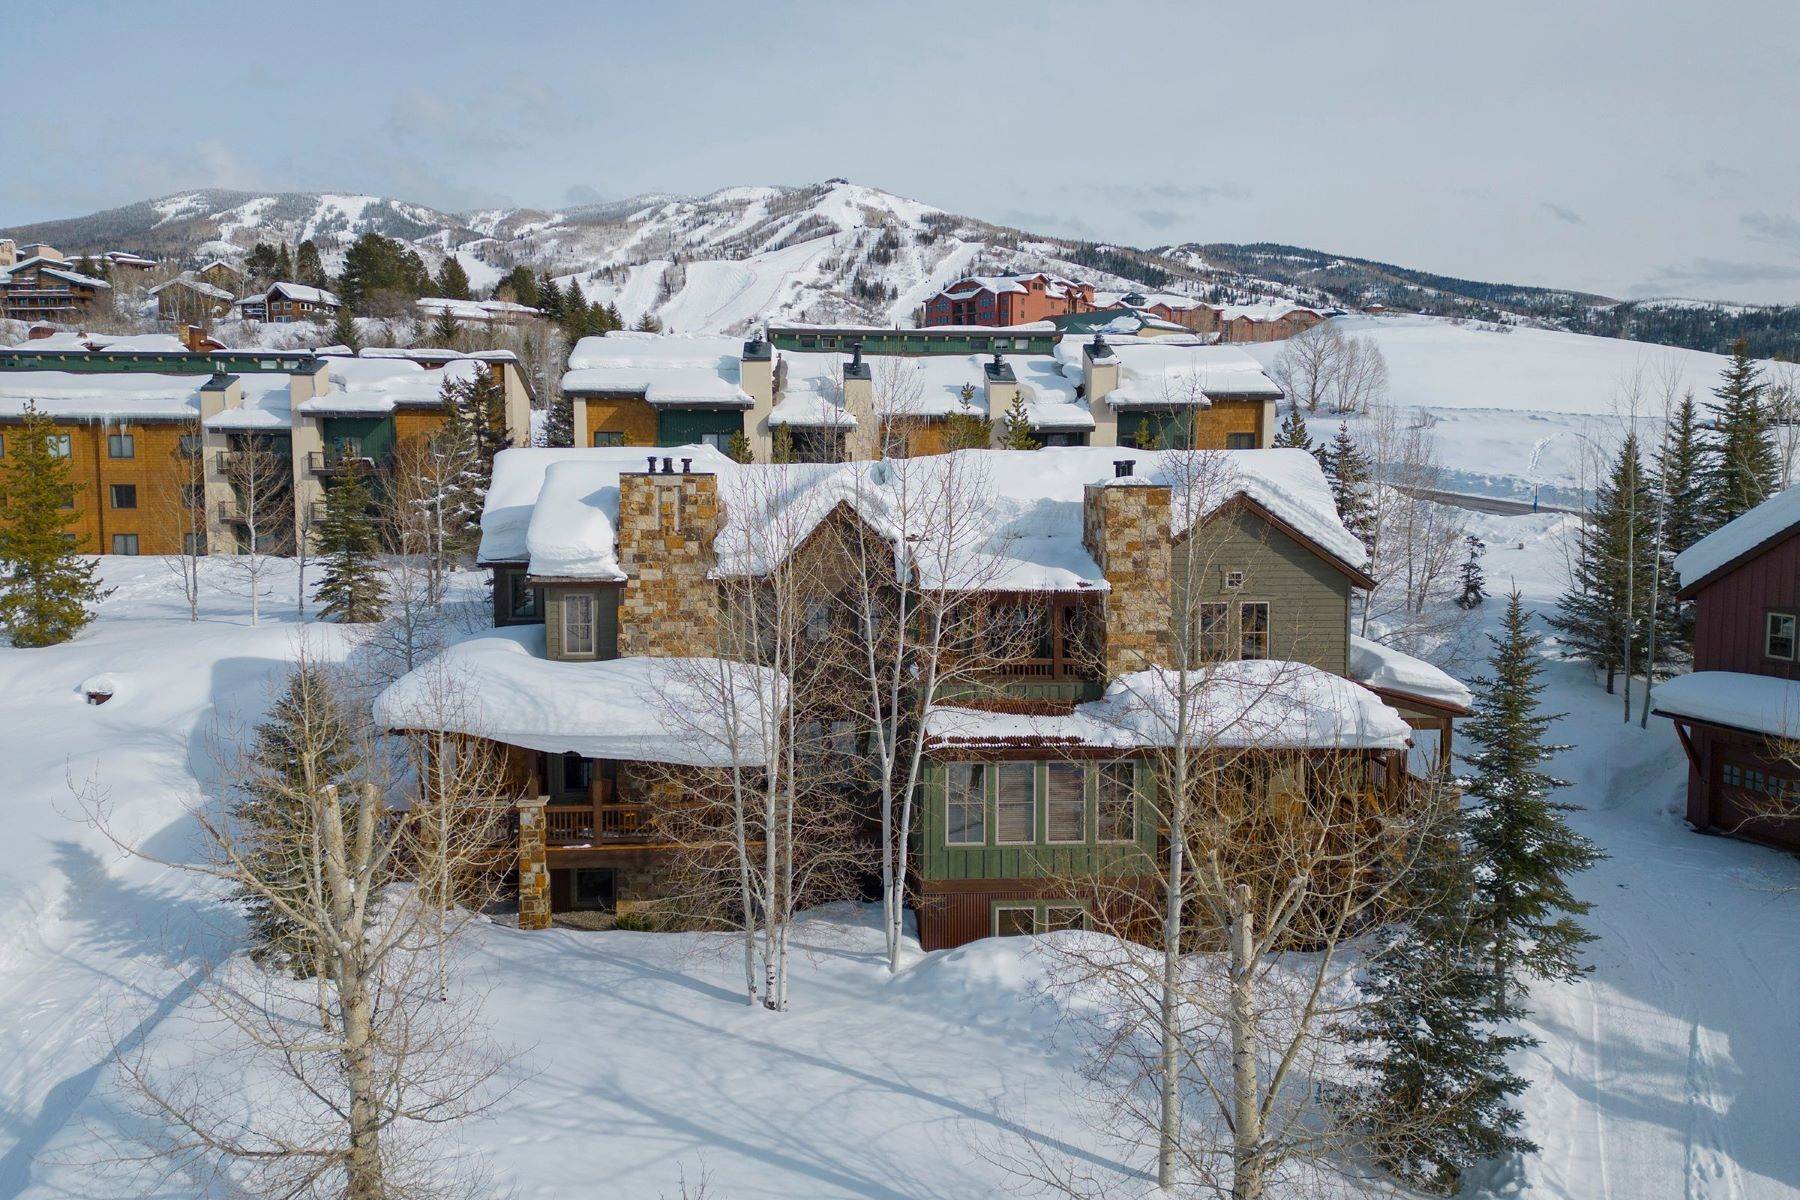 1. Fractional Ownership Property for Sale at 1331 Turning Leaf Court, Steamboat Springs, CO, 80487 1331 Turning Leaf Court Steamboat Springs, Colorado 80487 United States